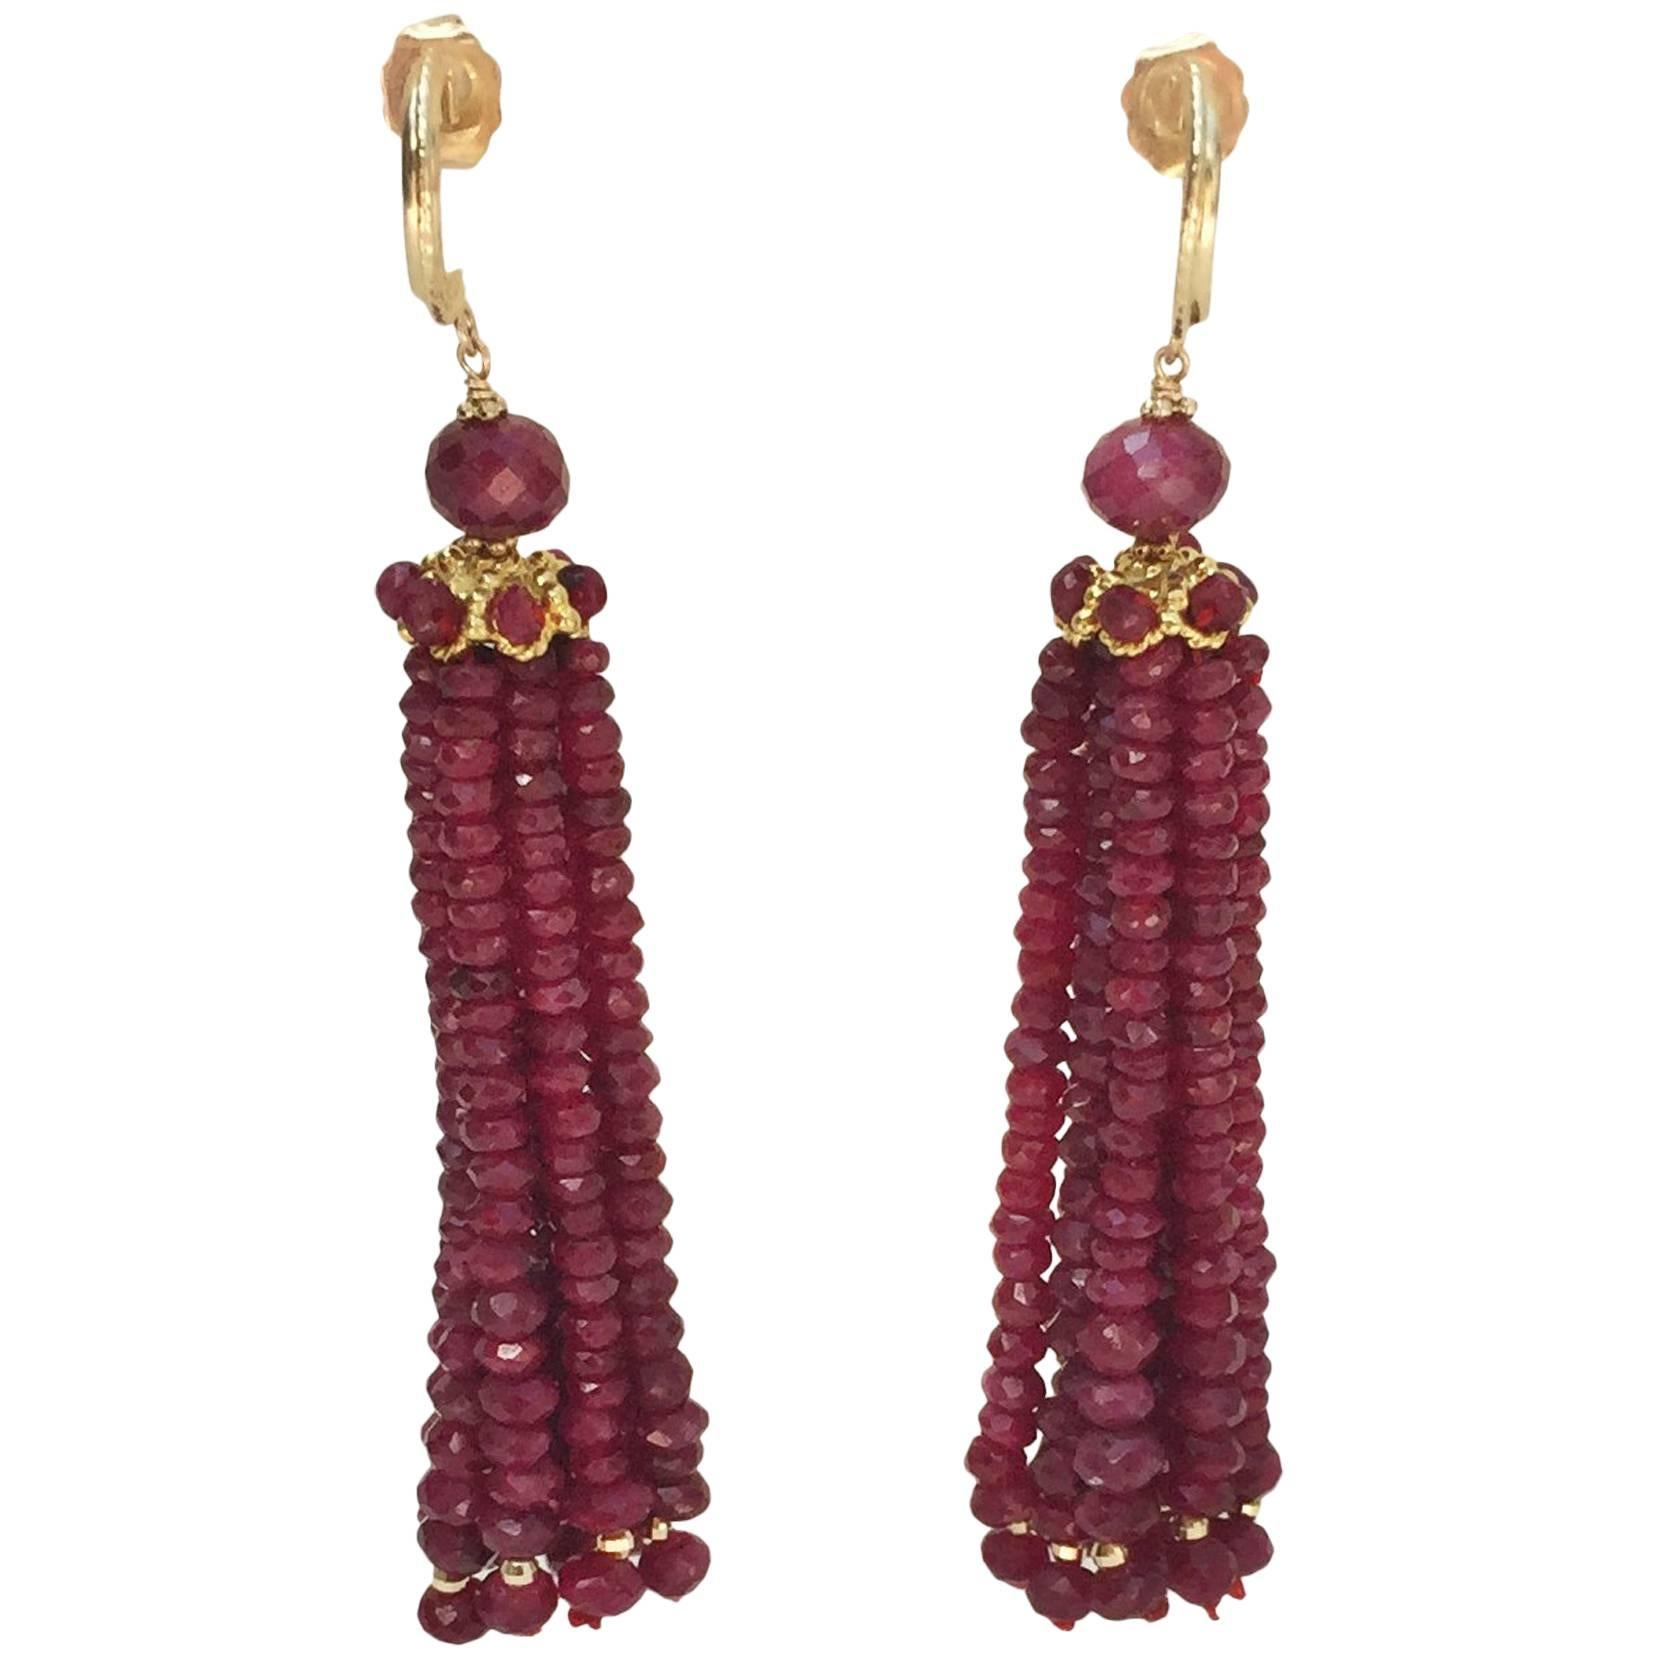 Marina J. Elegant Tassel Earrings with Sparkling Ruby Beads and 14k Yellow Gold 